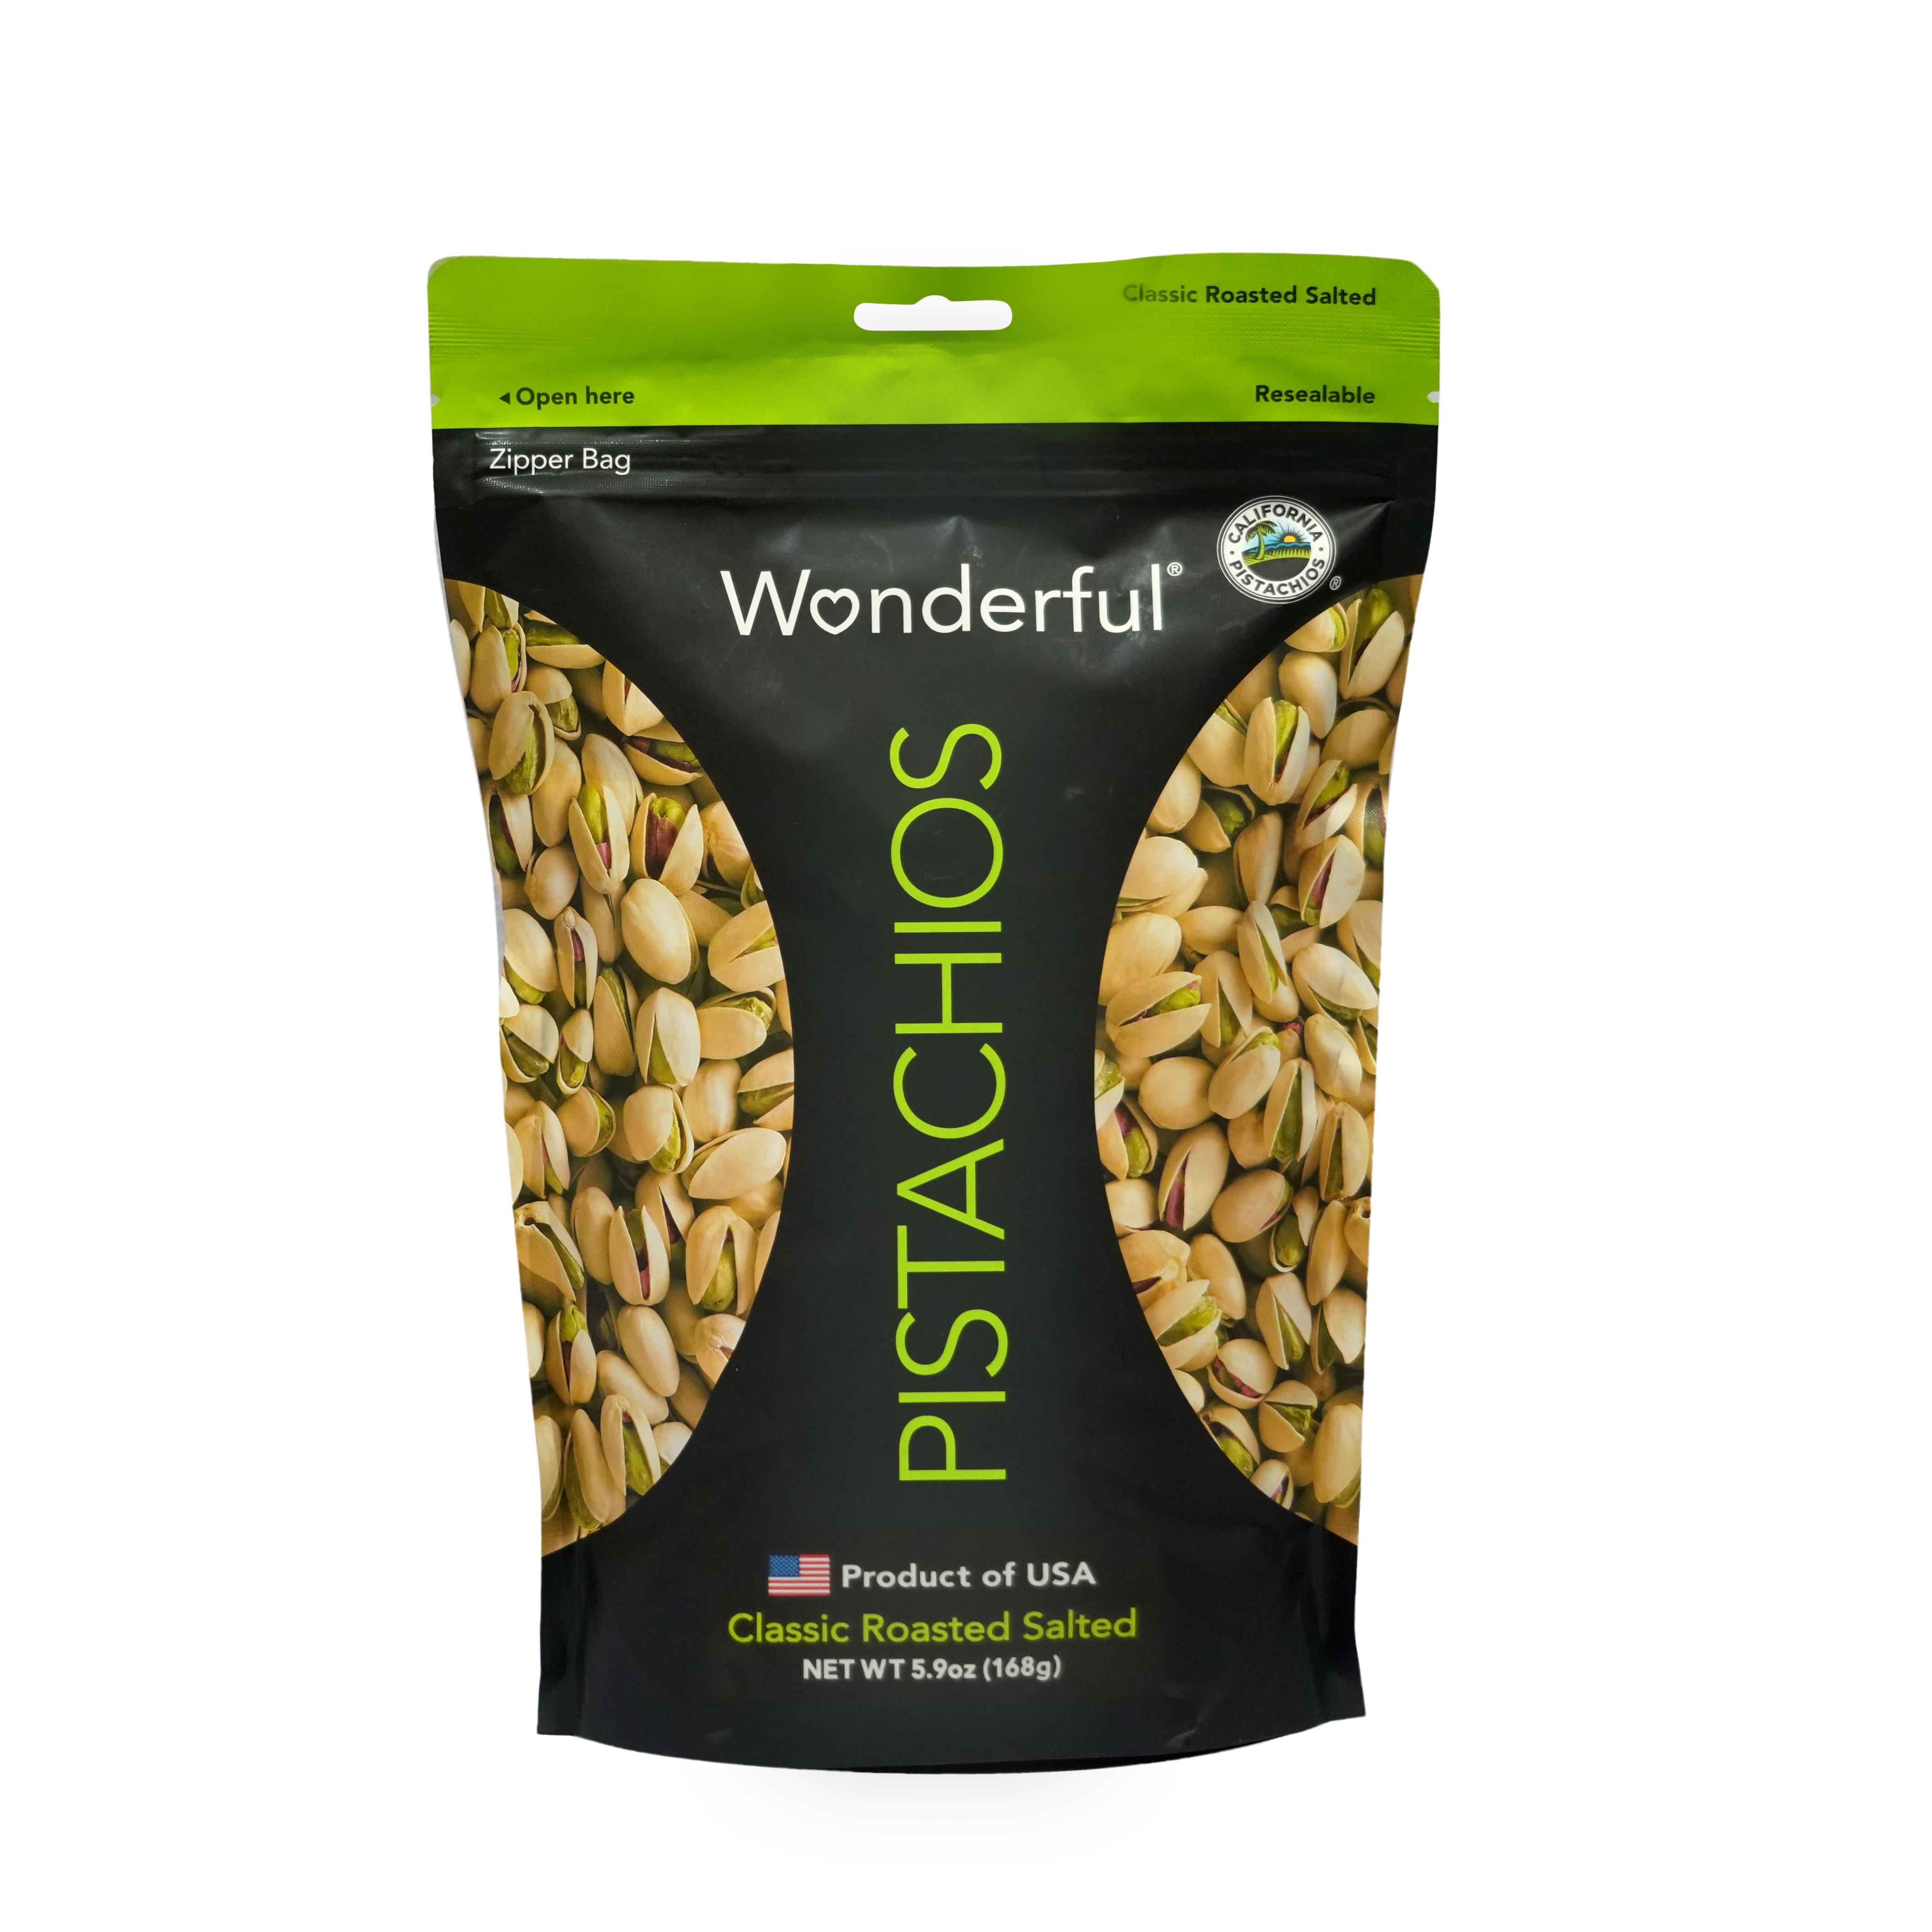 Wonderful Roasted Salted Pistachios (168g)